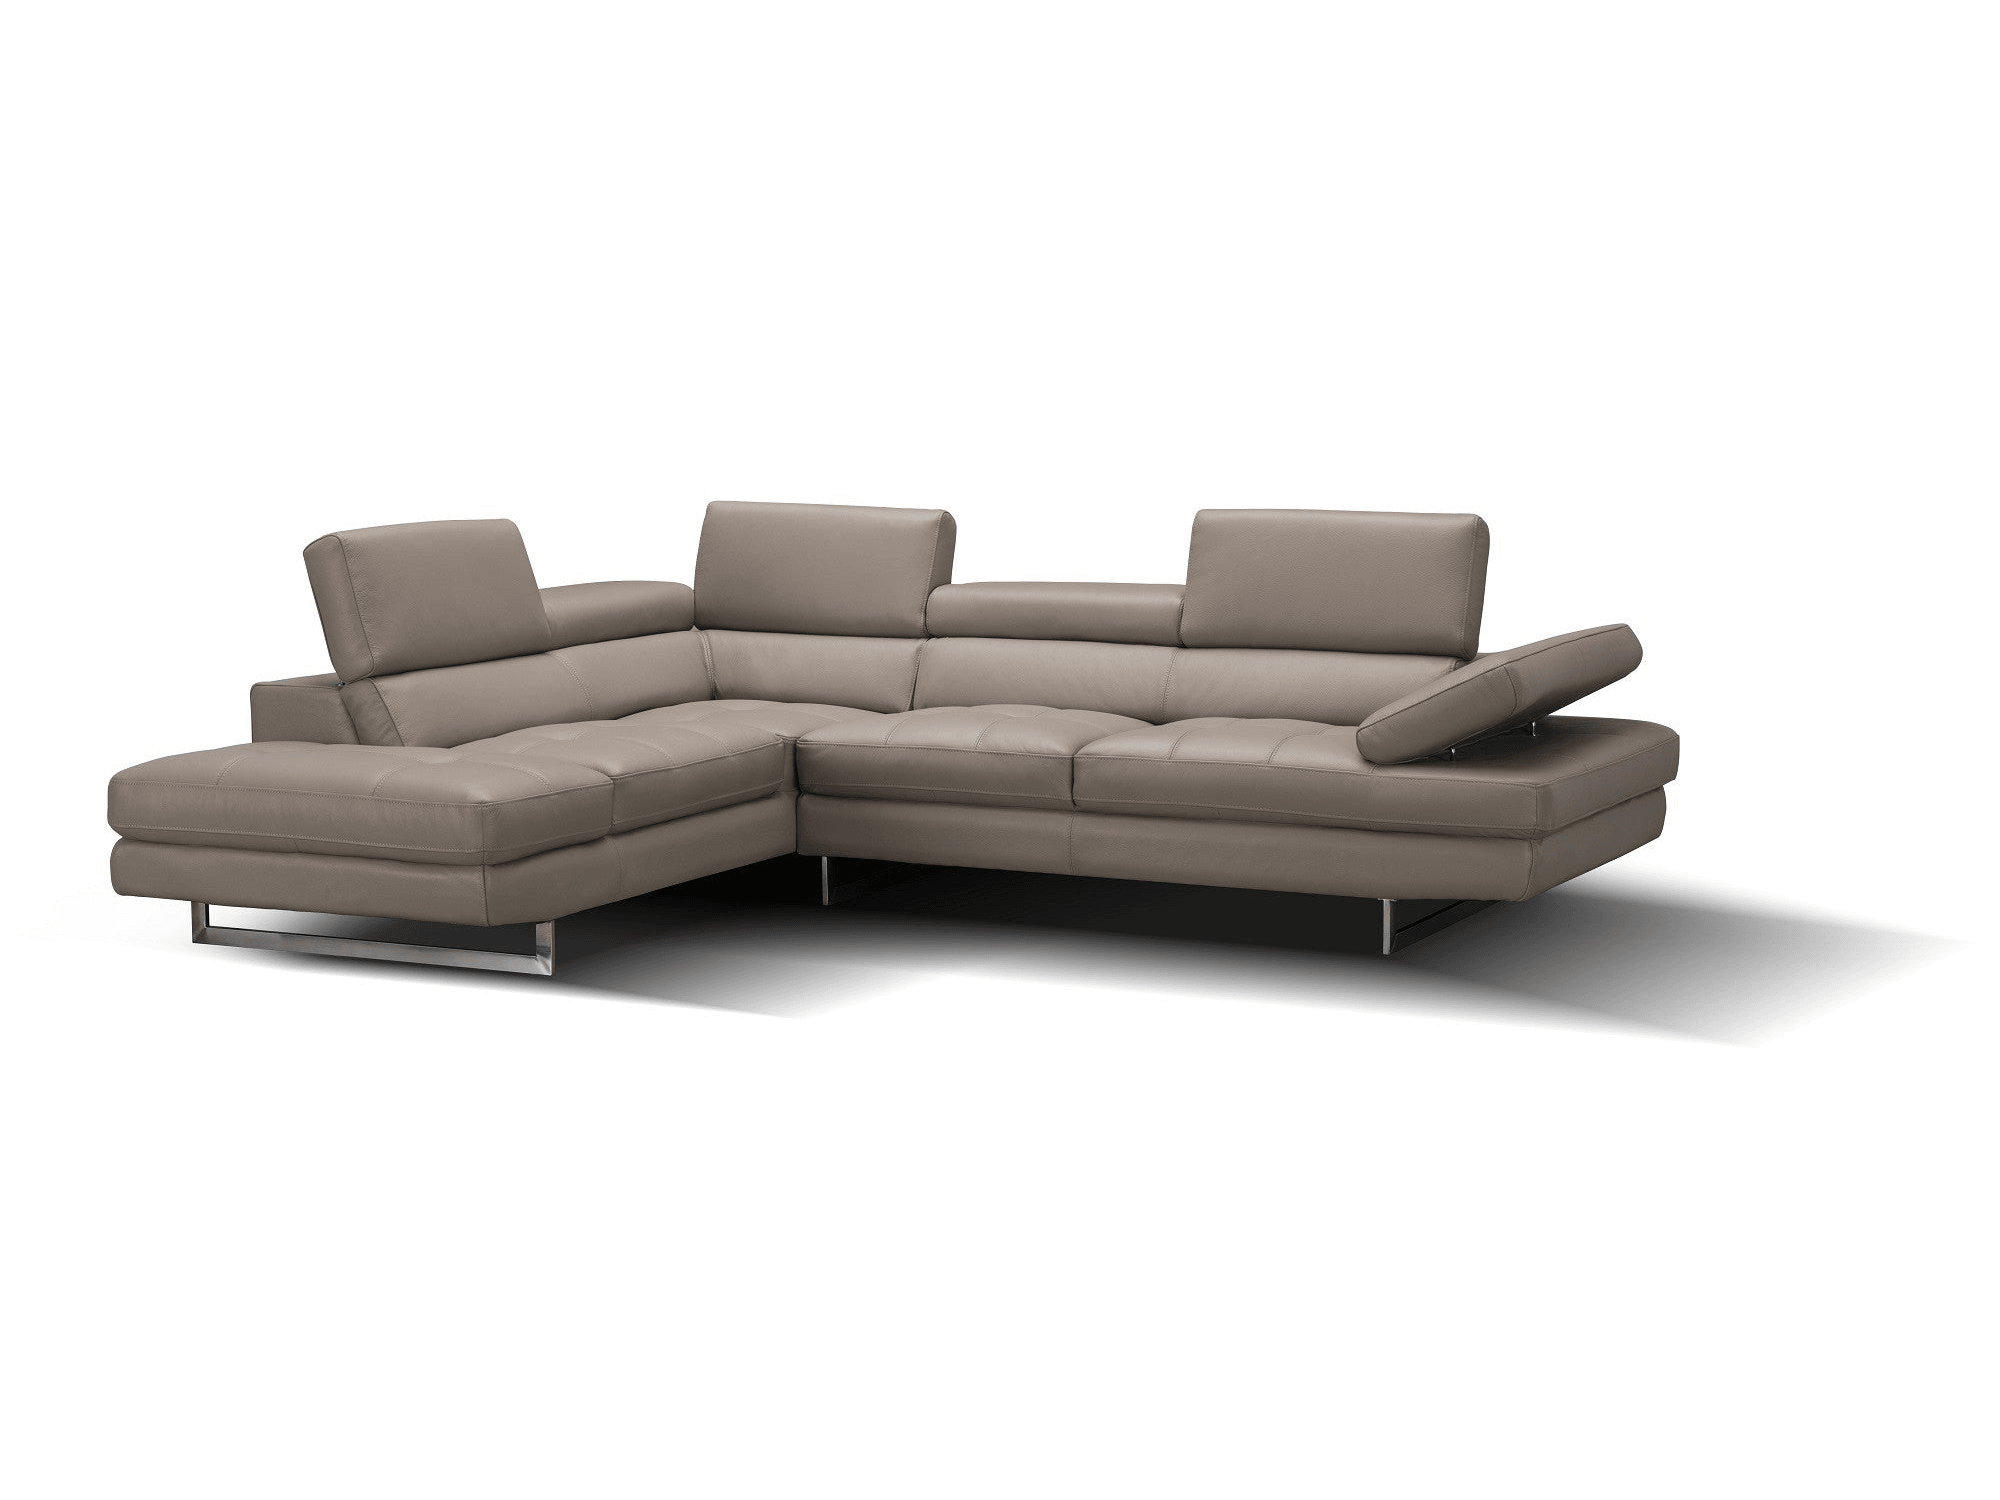 Modernology Italian Leather Sectional in Peanut - Euro Living Furniture